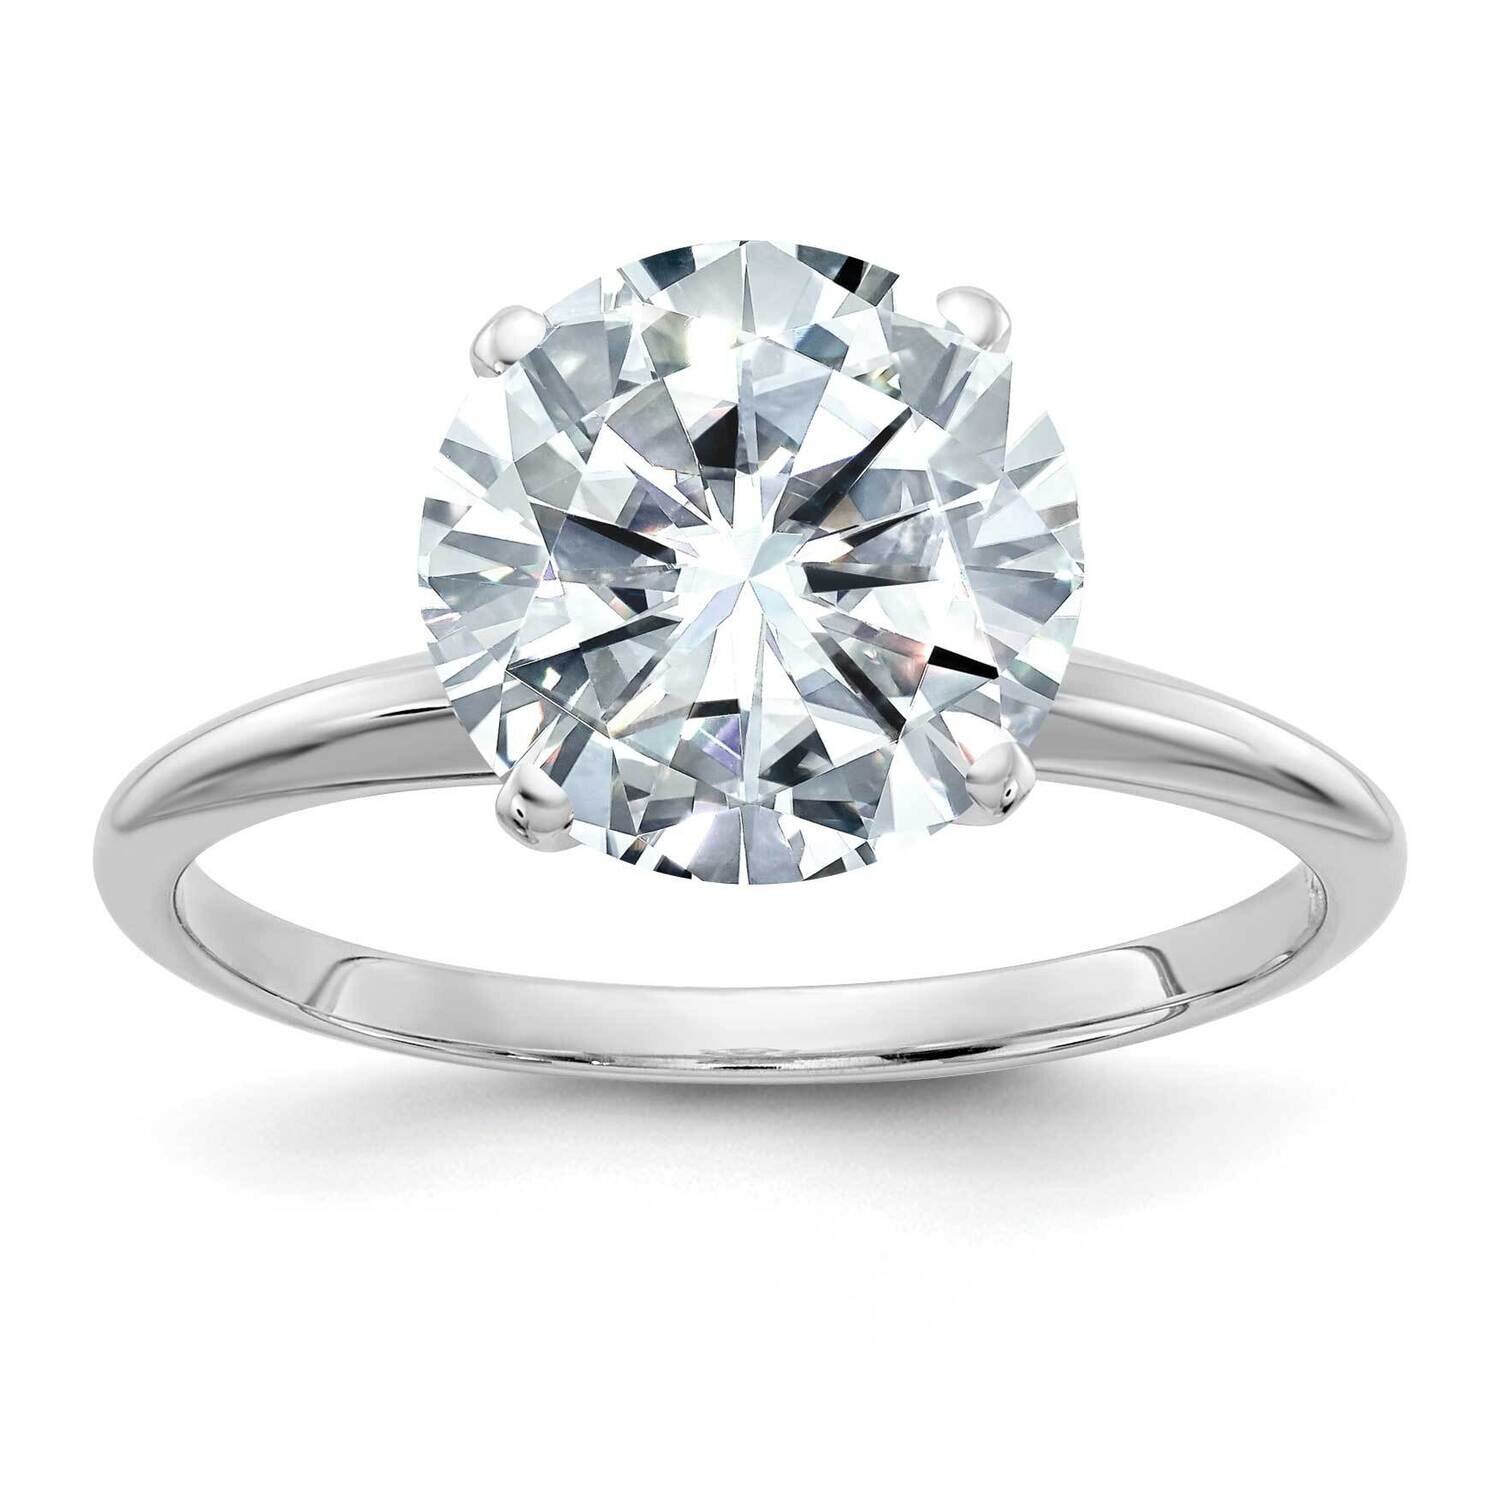 3ct. D E F Pure Light Round Moissanite Solitaire Ring 14k White Gold WGSH15-17MP-6